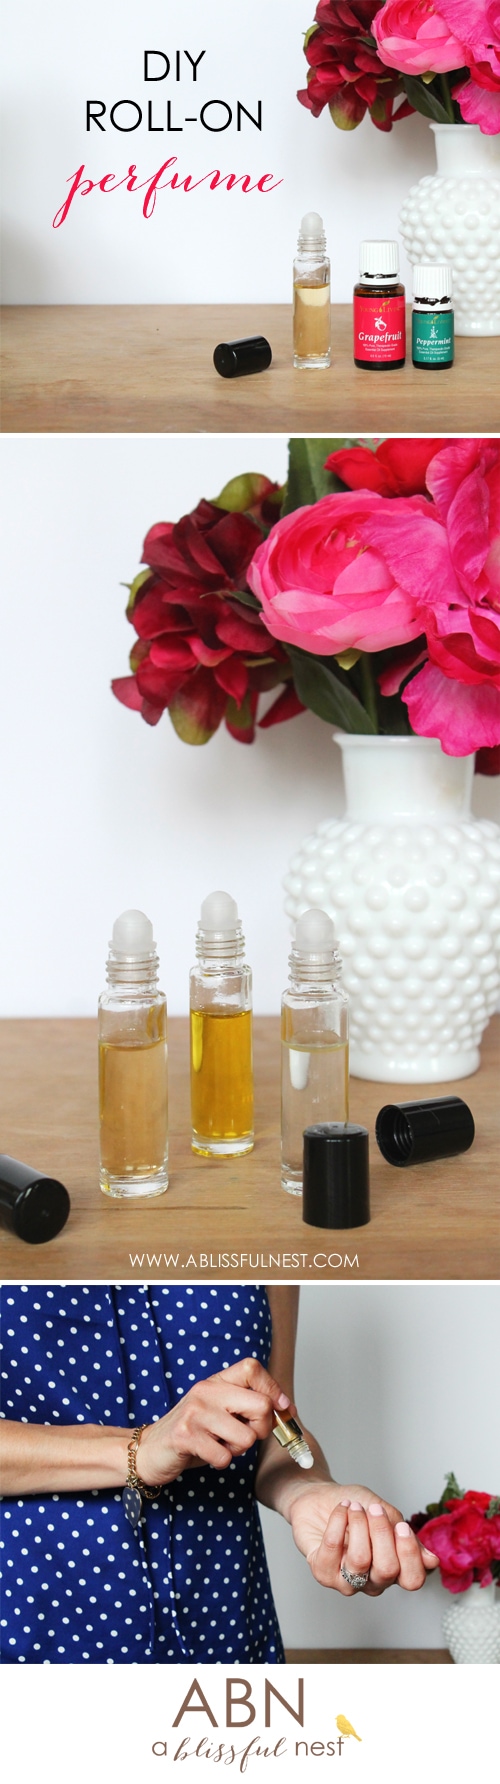 DIY Roll On Perfume by A Blissful Nest 